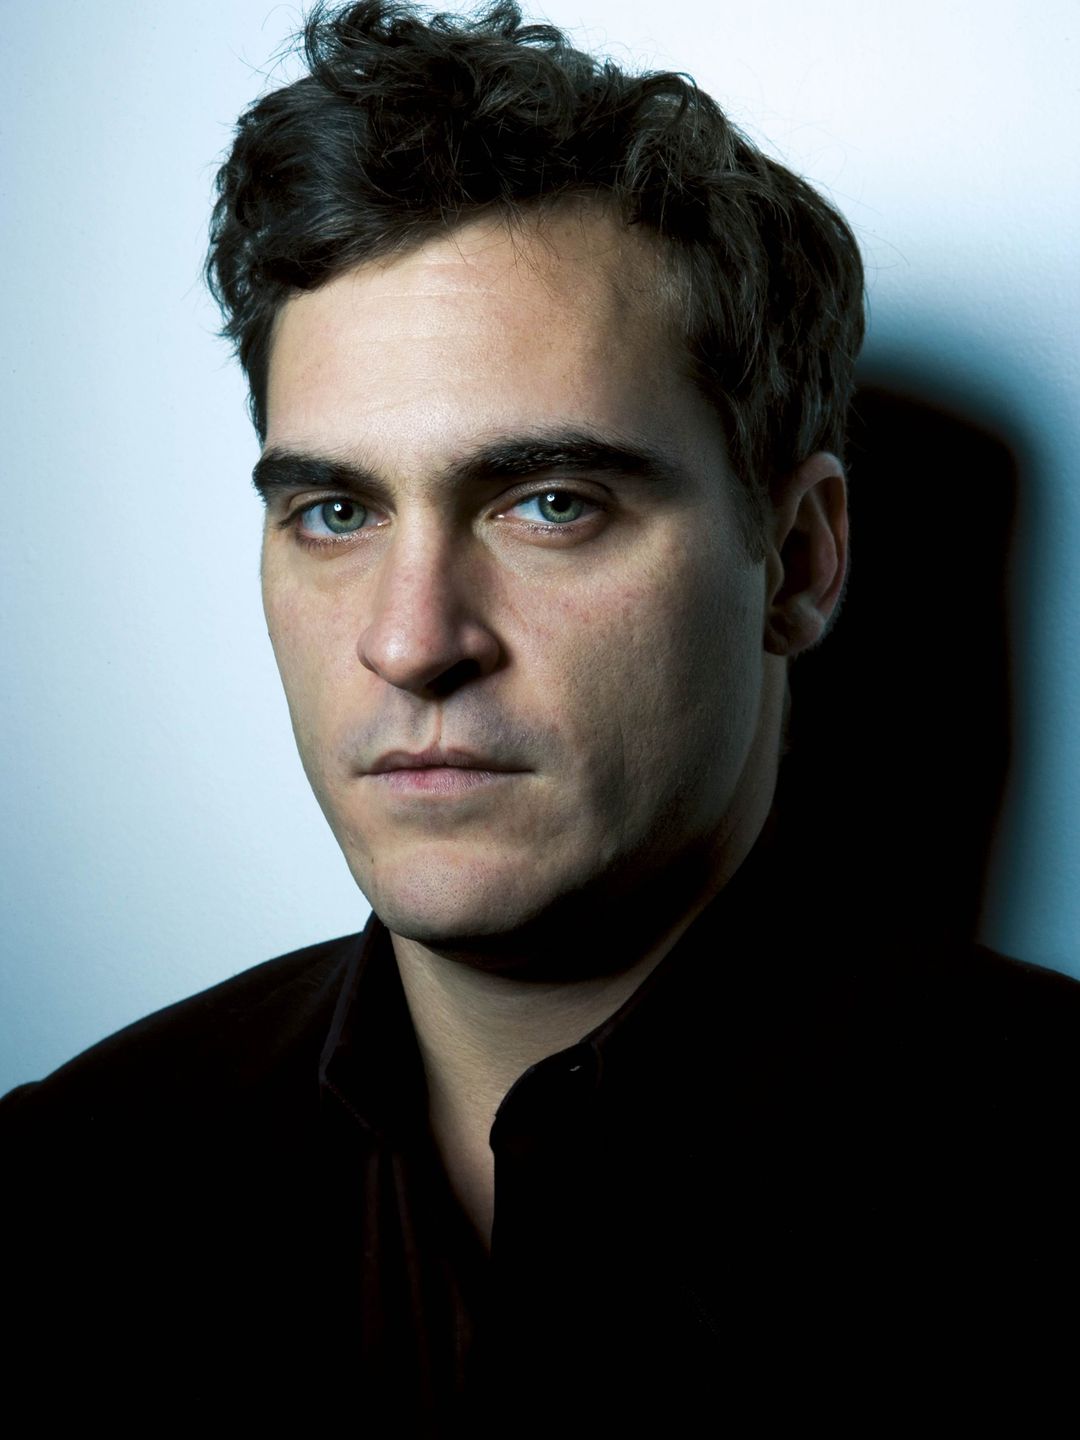 Joaquin Phoenix how did he became famous